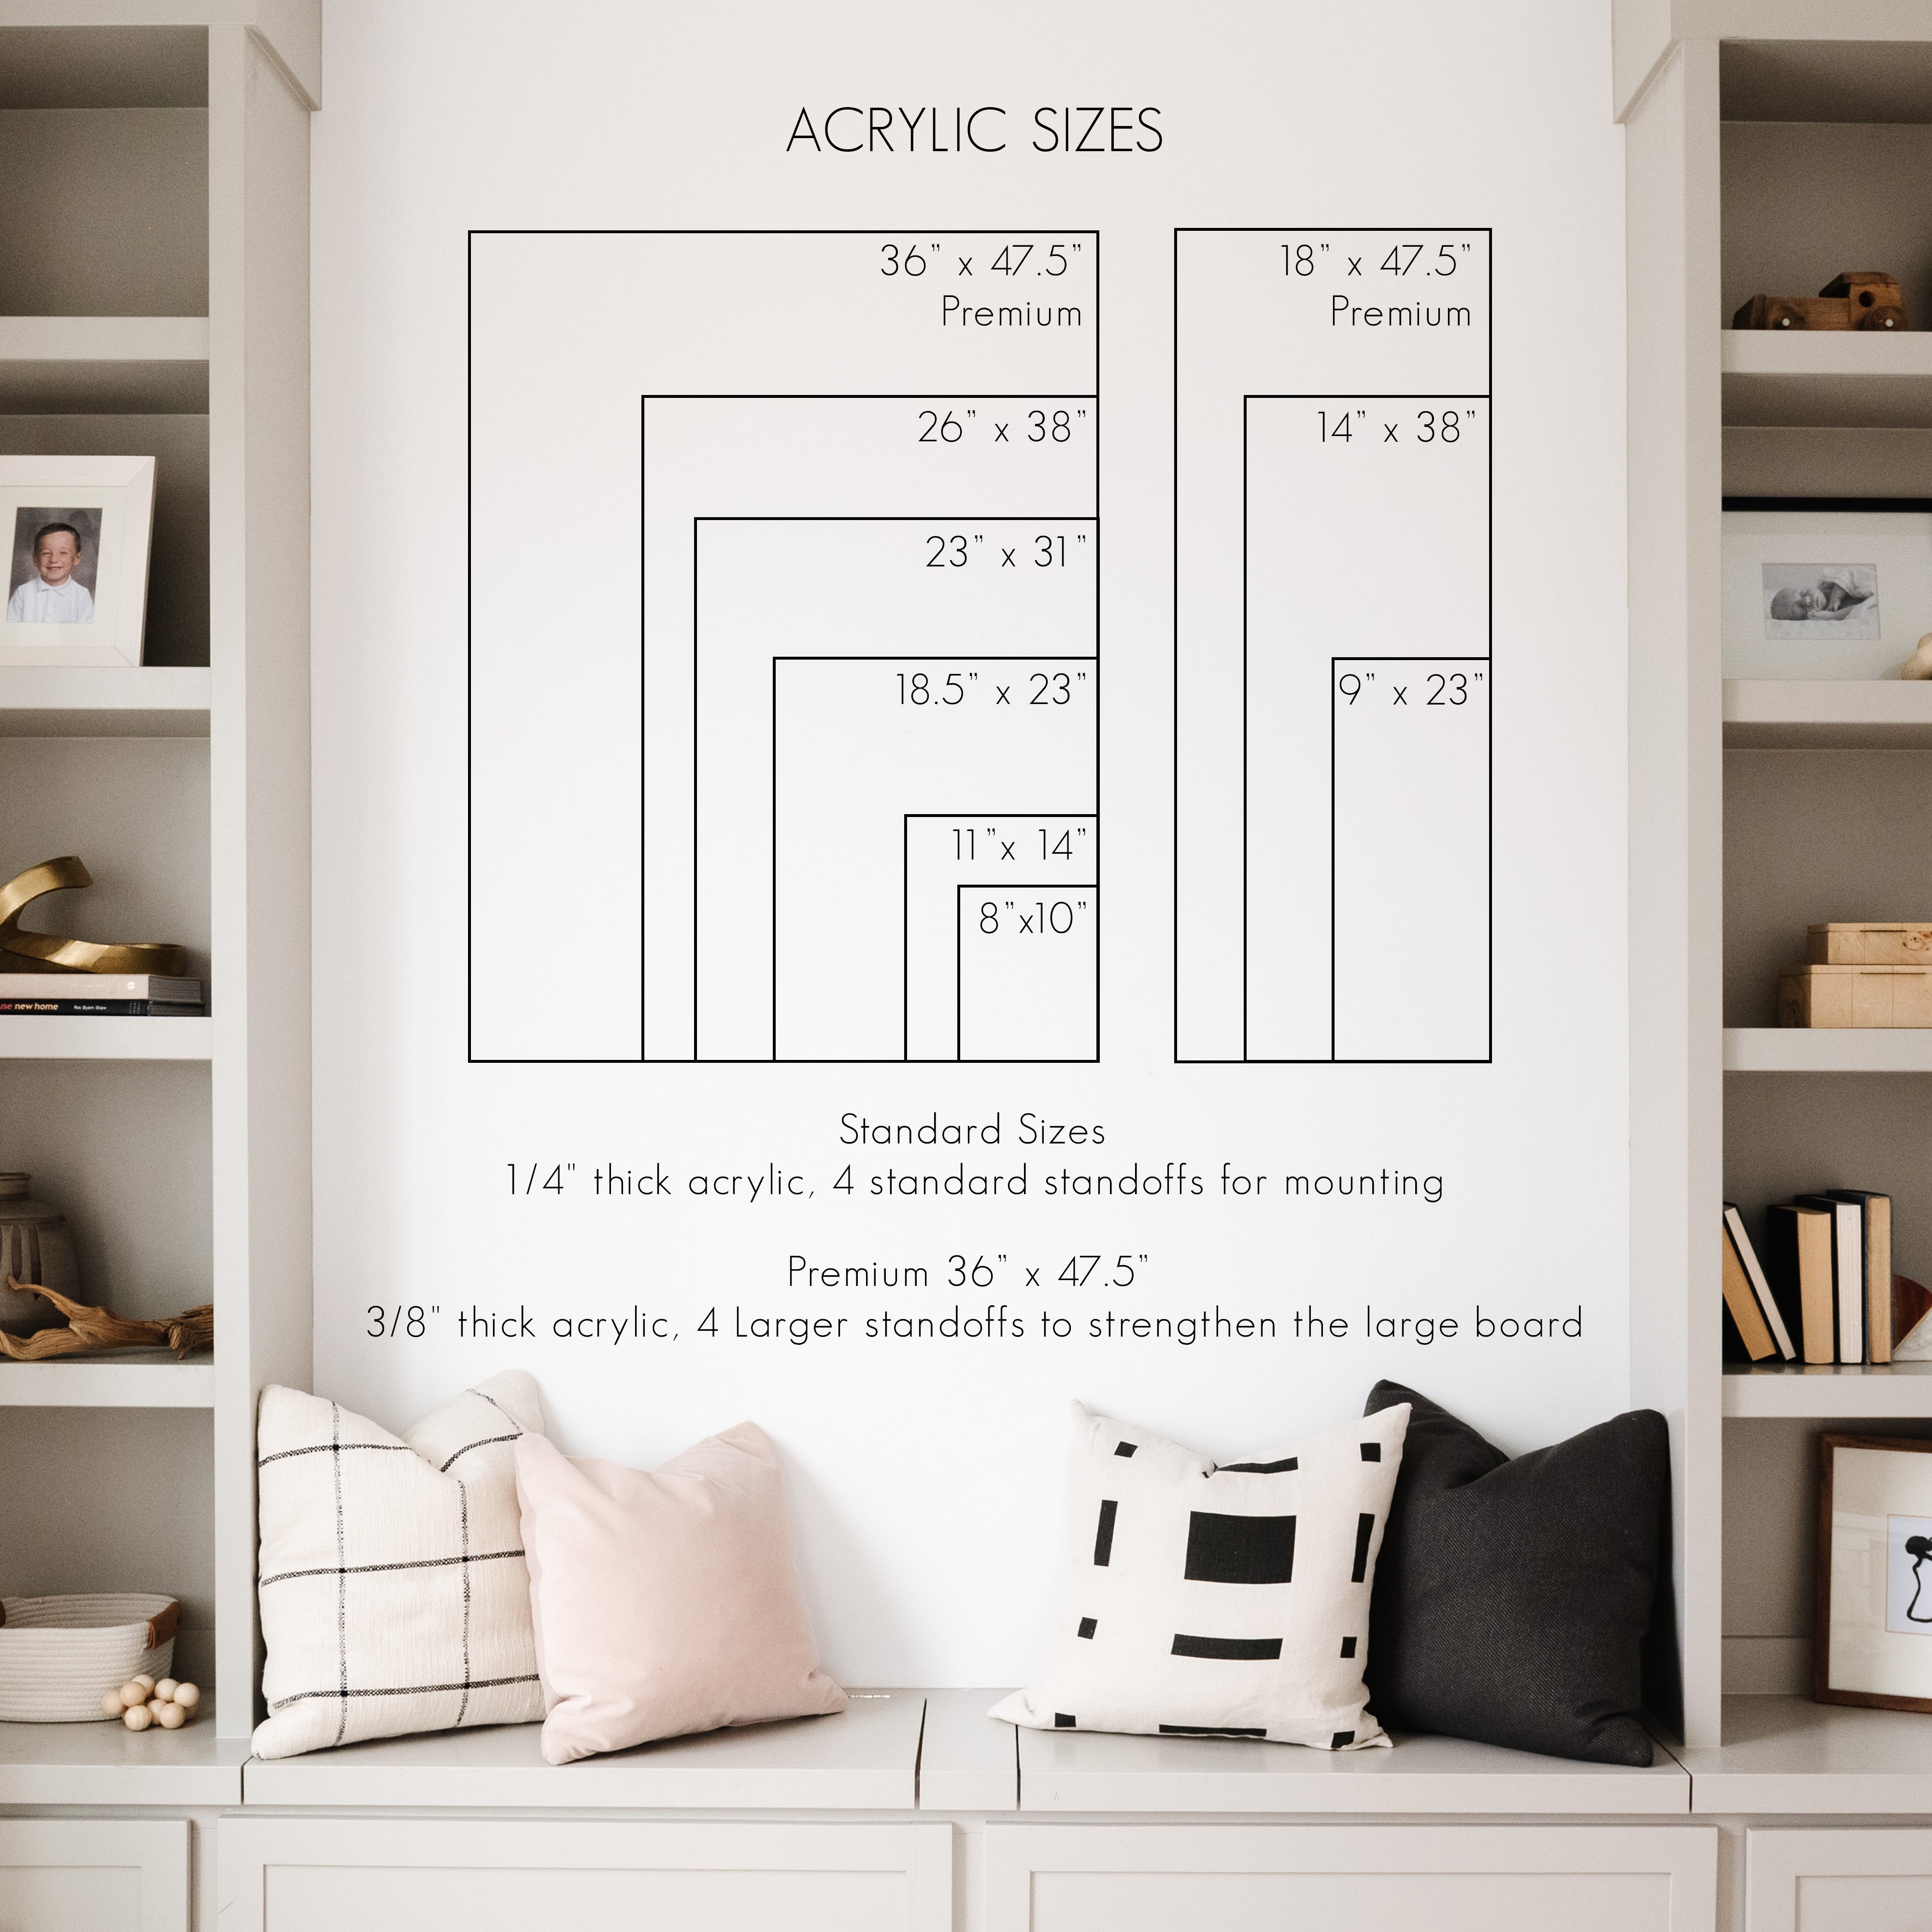 Monthly Frosted Acrylic Calendar + 5 Sections | Vertical Craig